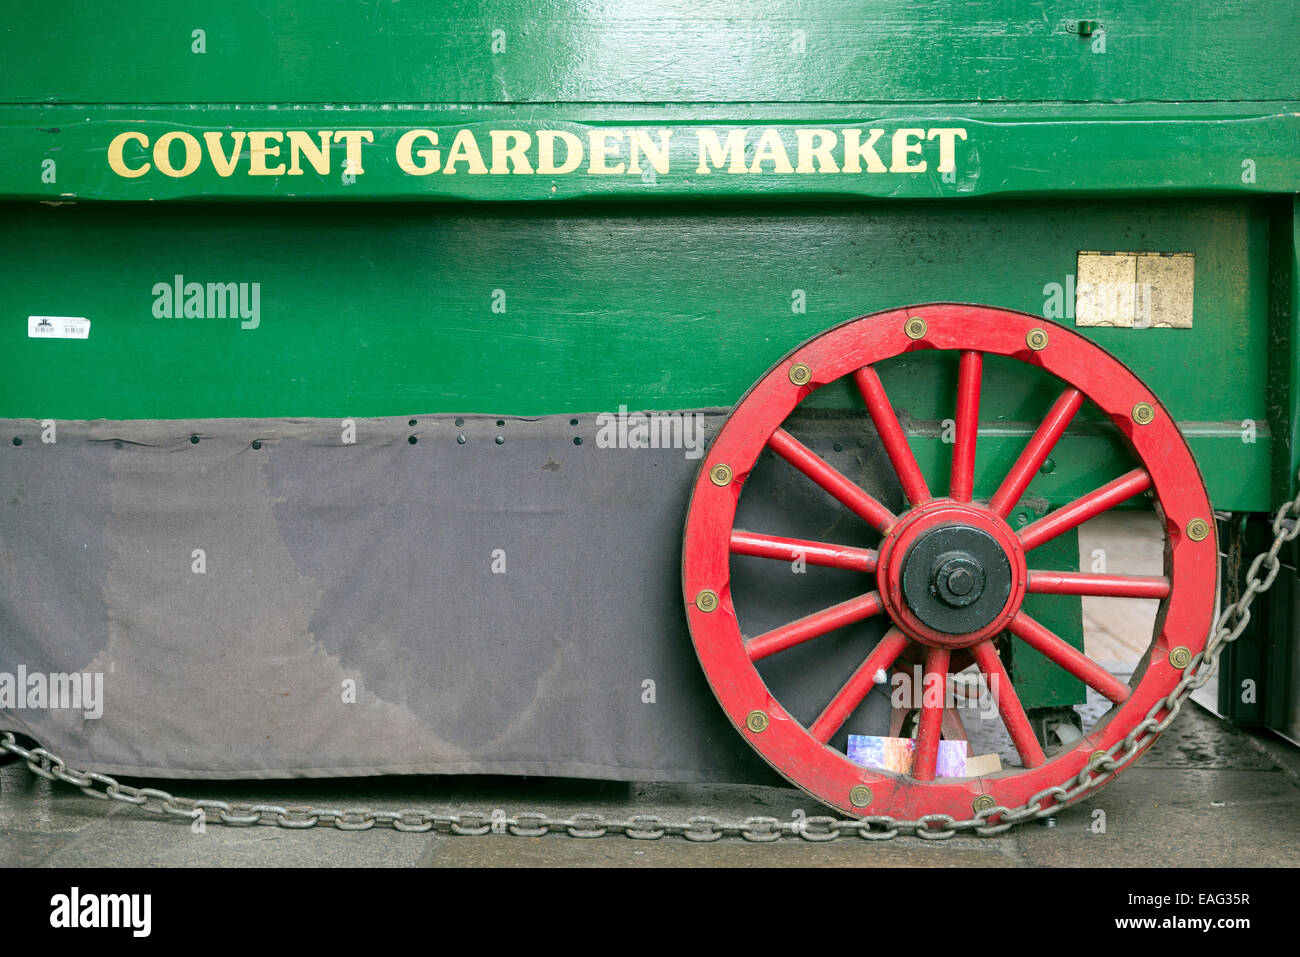 LONDON, UNITED KINGDOM - JUNE 5,  2014: Peddler wagon has 'Covent Garden Market' painted on the side, Apple Market, Covent Garde Stock Photo